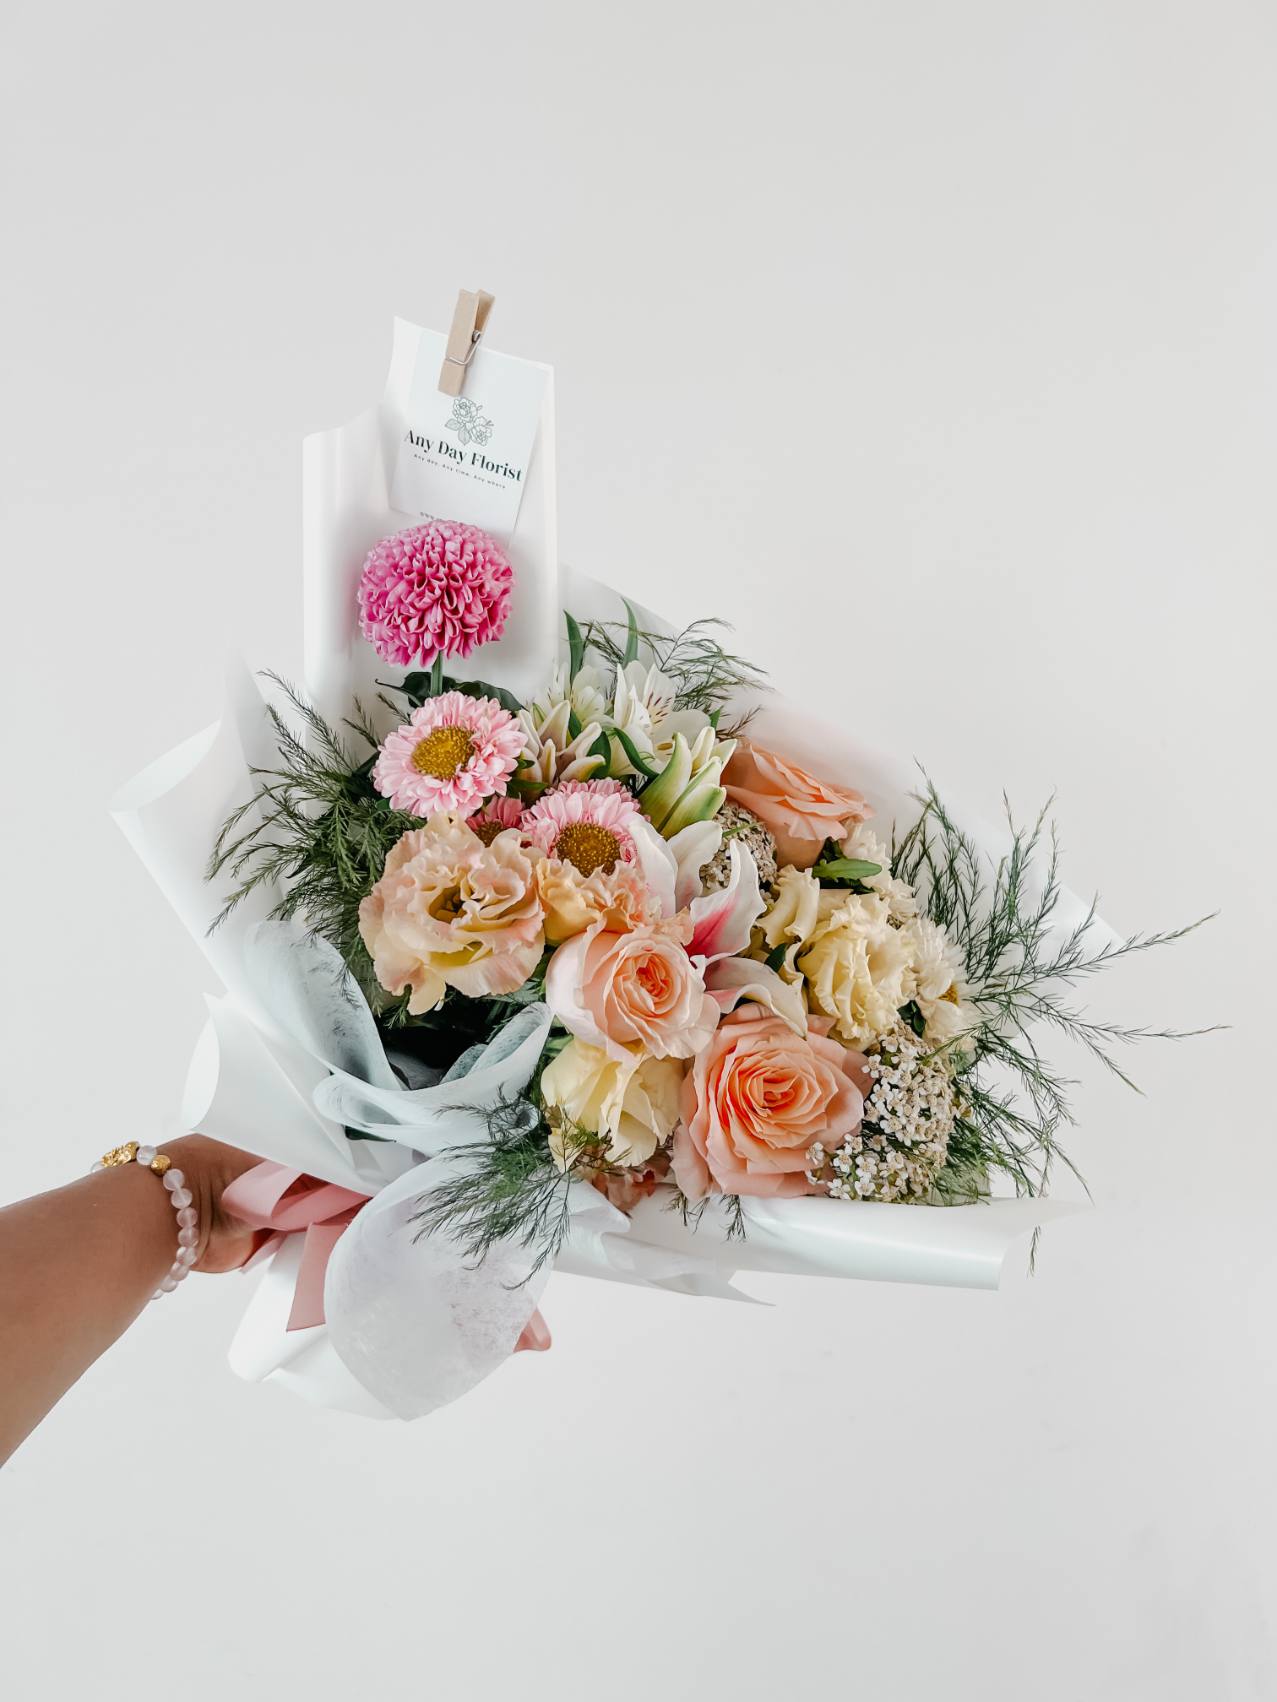 Any Day FloristThis bouquet is definitely as rare choice! You have to enquire first before making the purchase as Asters are seasonal and are not available all year round! 

*PleasAster Love | Bouquet with Alster Flowers